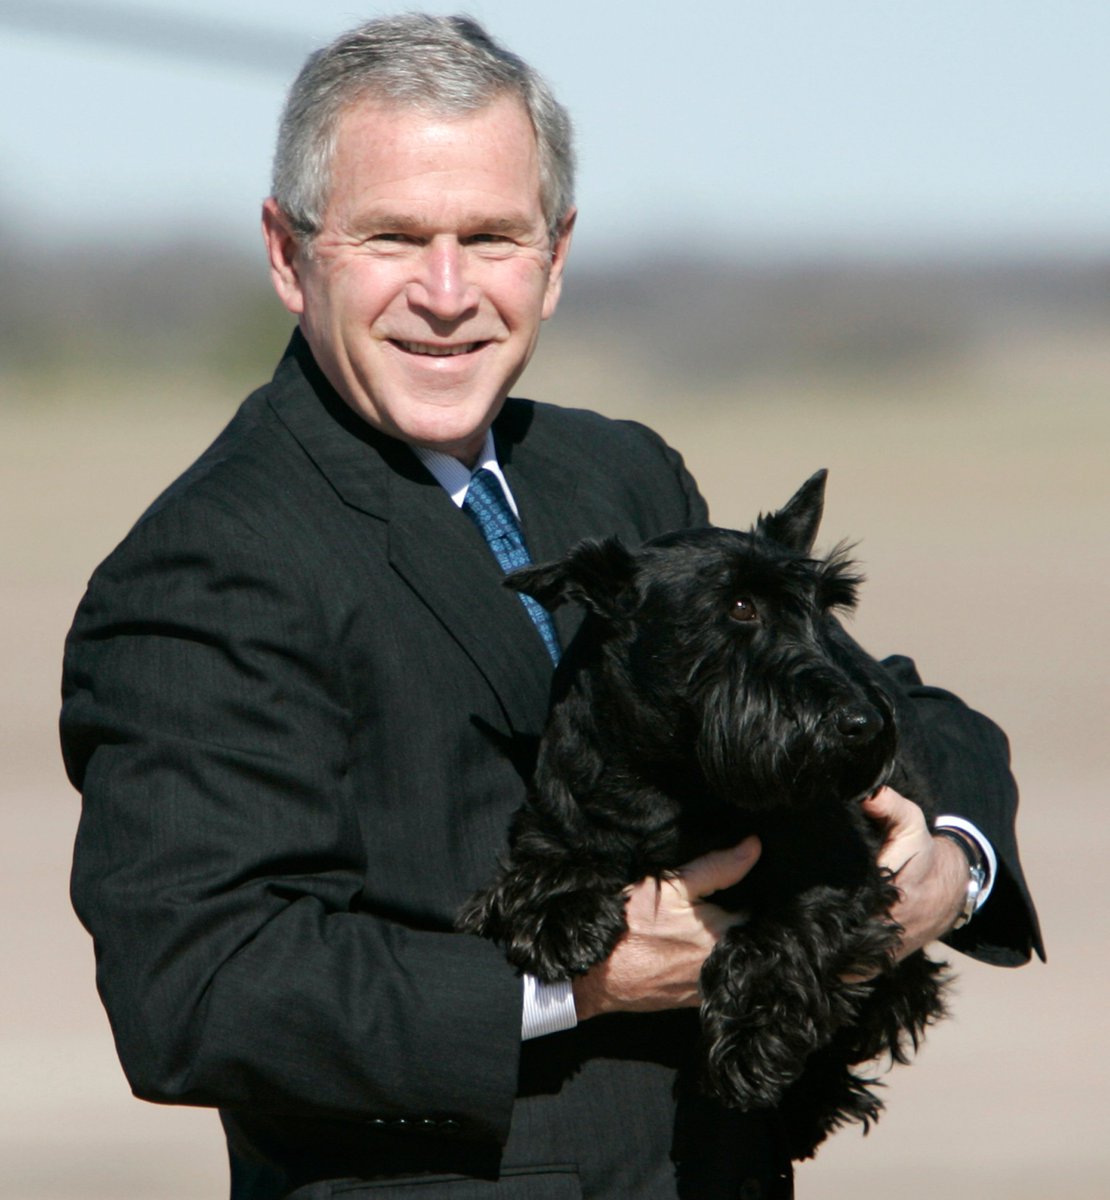 Specifically, I show my students that George W. Bush exhibited motivations that could be labeled REALIST and could be labeled LIBERAL.